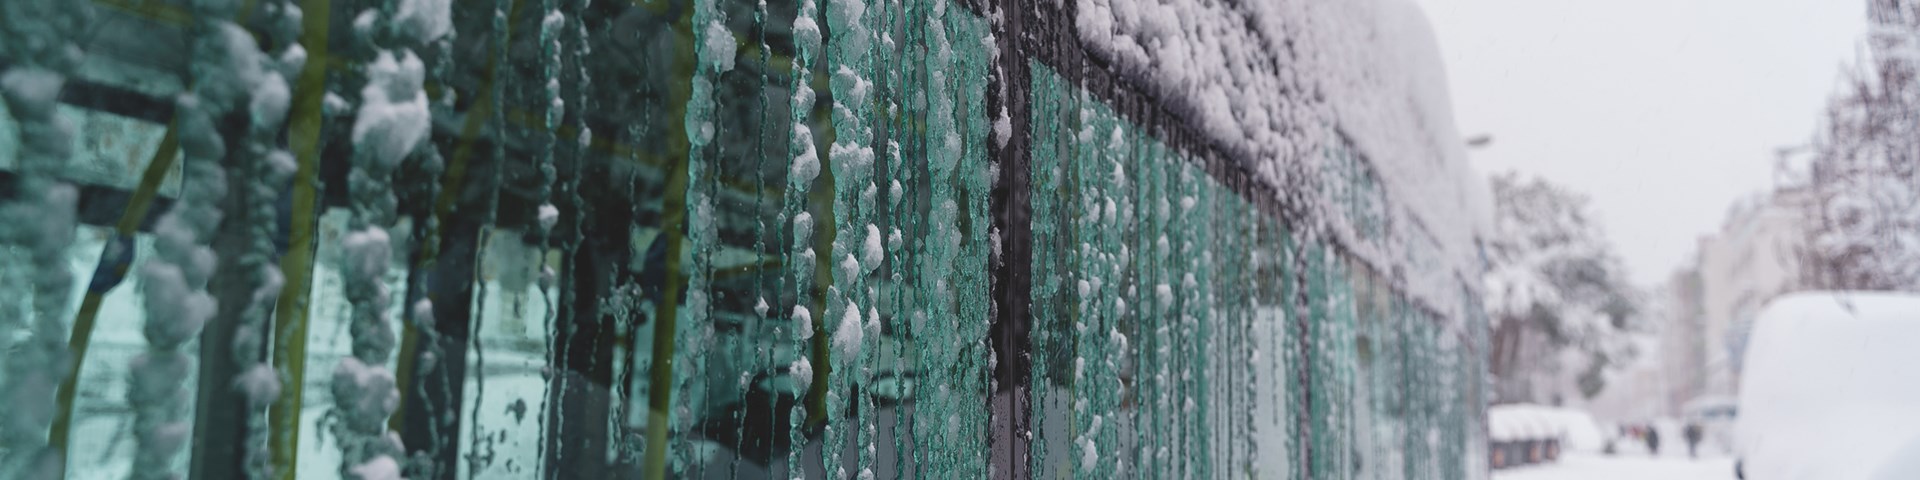 Close up of frozen windows on bus